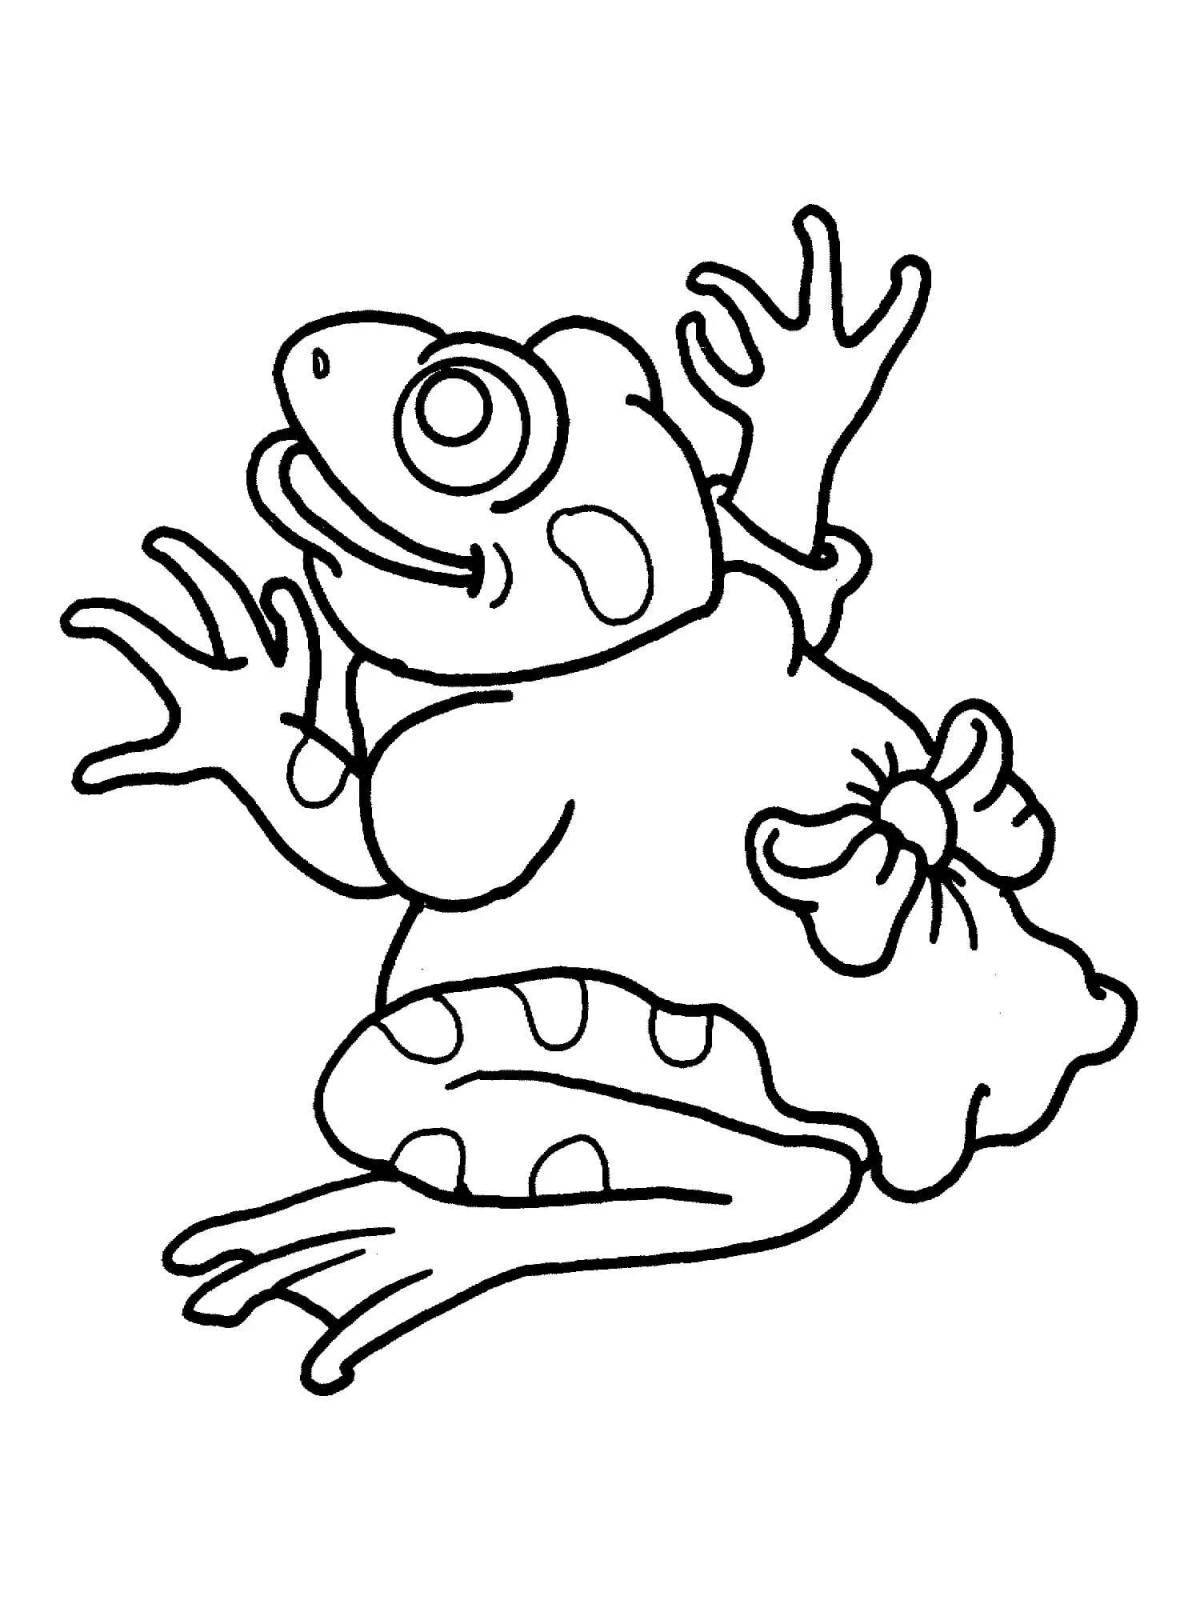 Spicy coloring of a cute frog with a fungus on its head